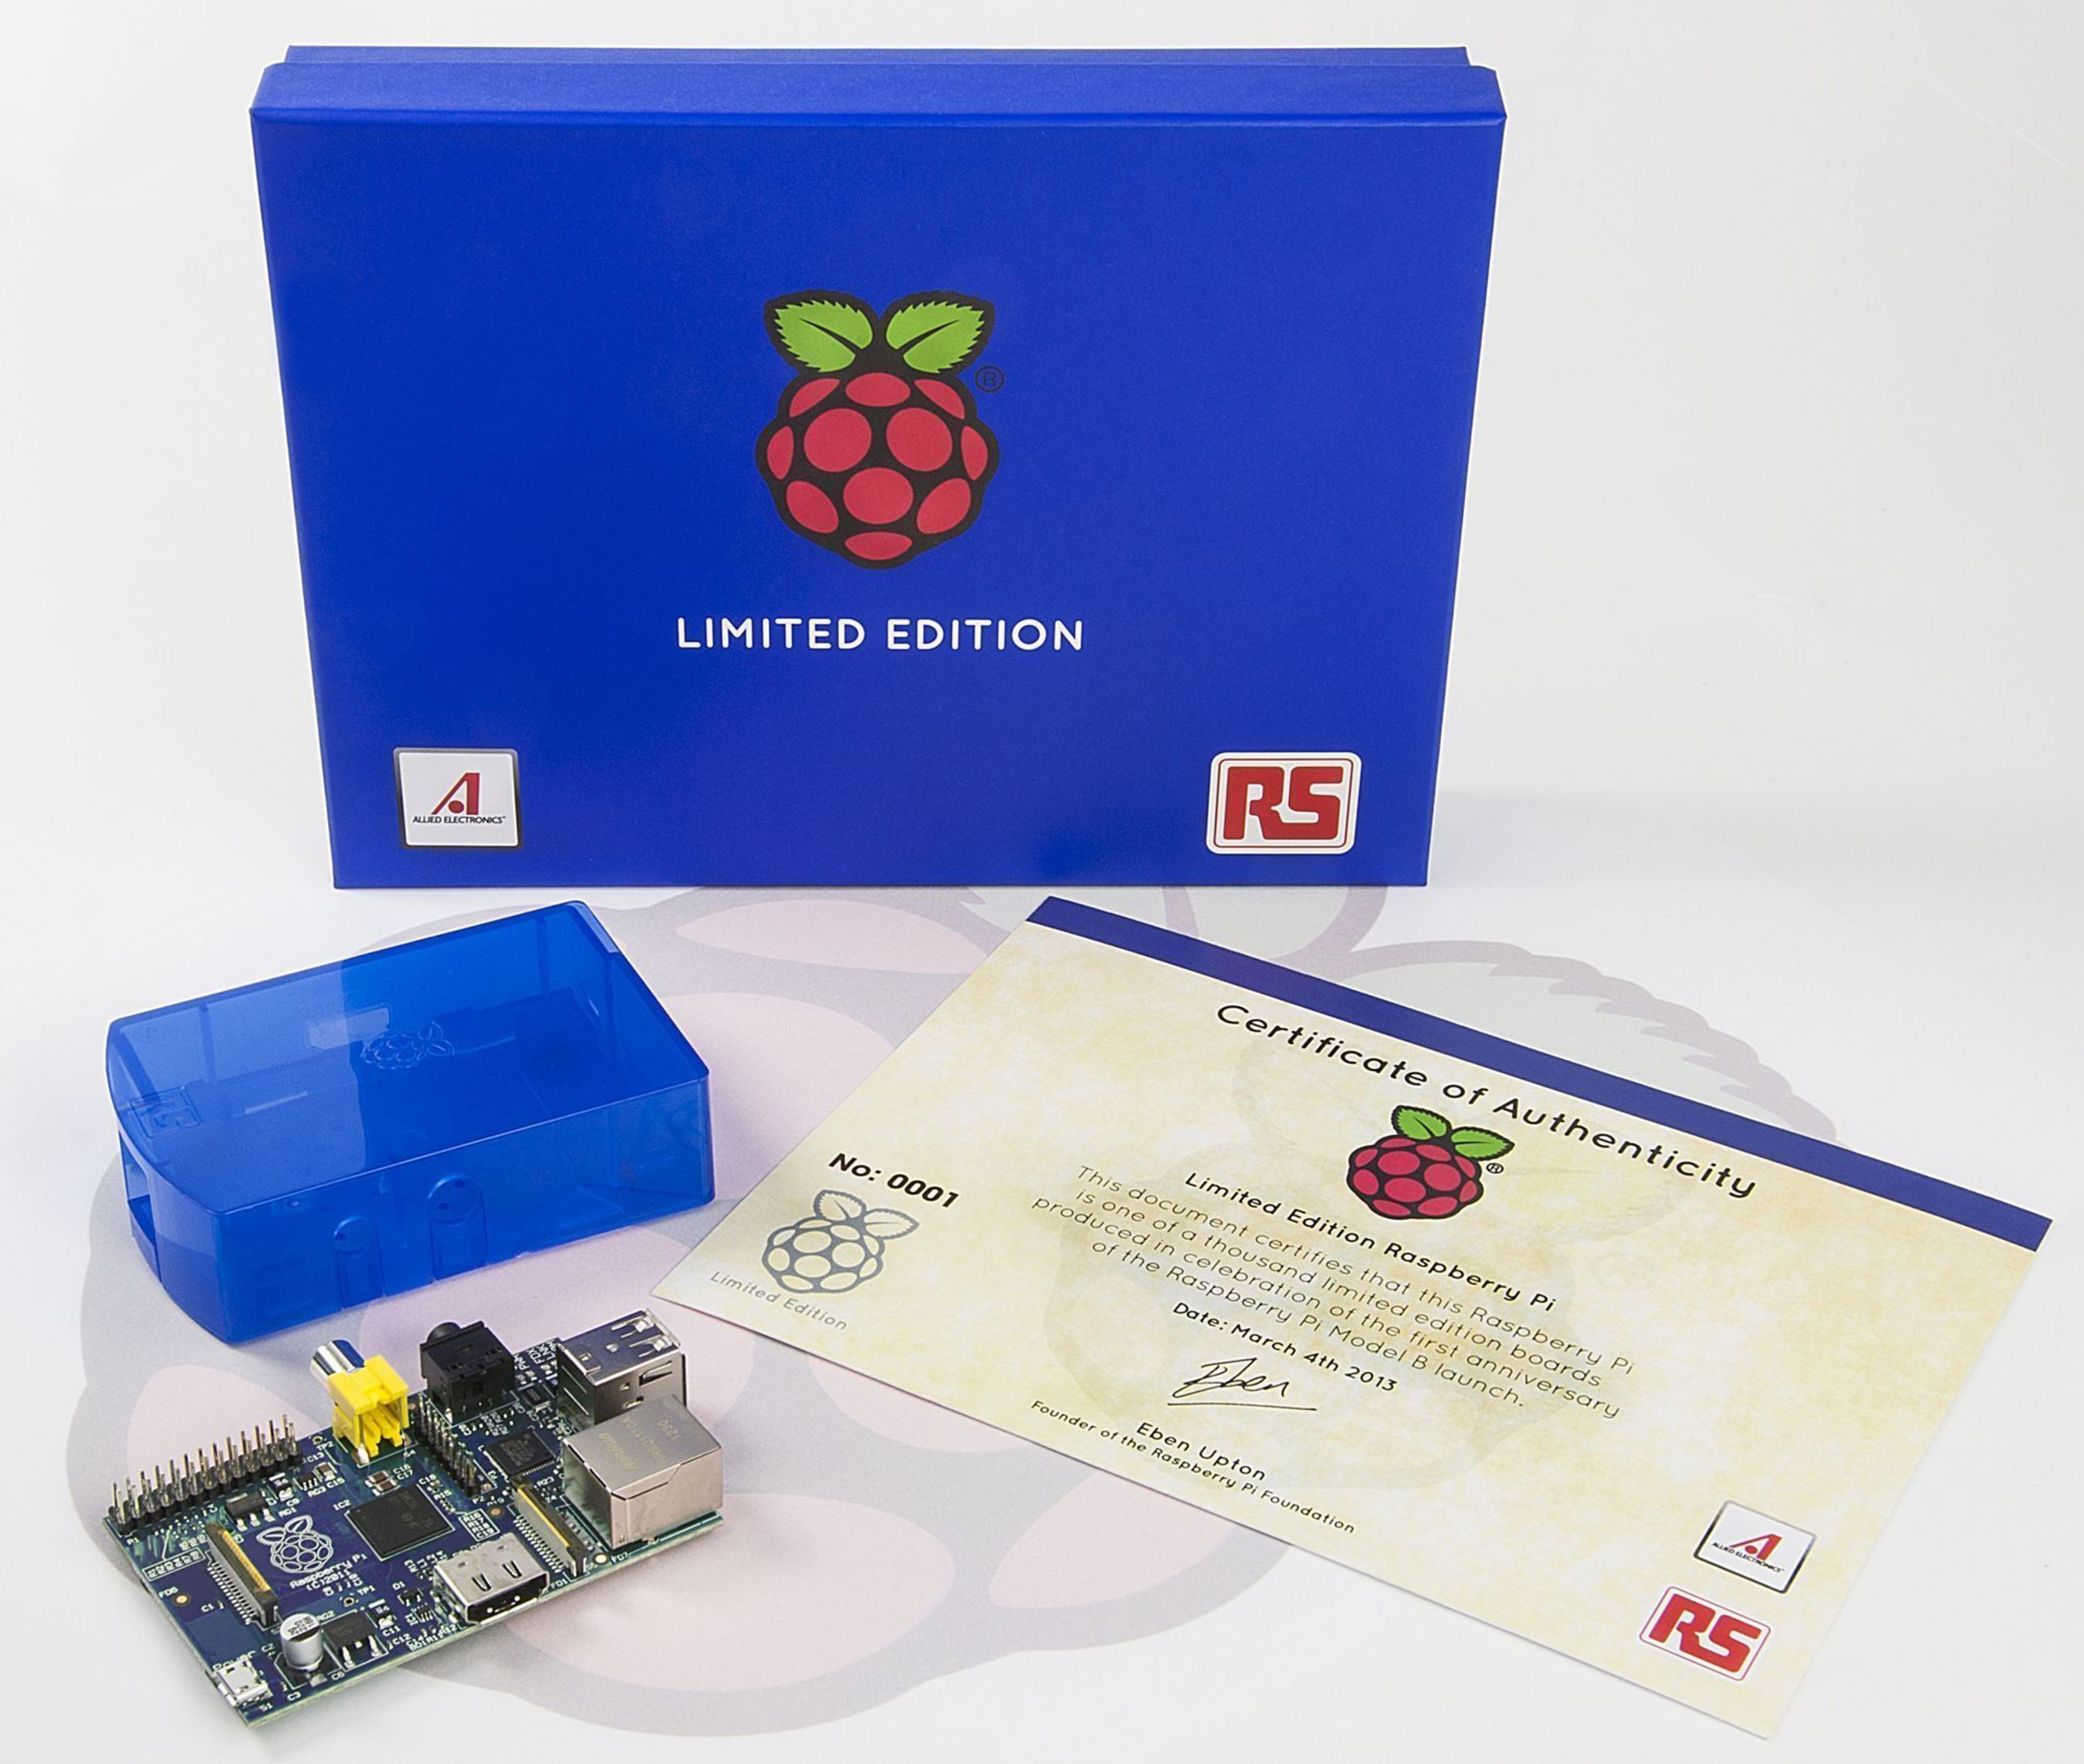 RS Components releases free limited edition Raspberry Pi to celebrate first anniversary of the credit-card-sized computer (PRNewsFoto/RS Components)